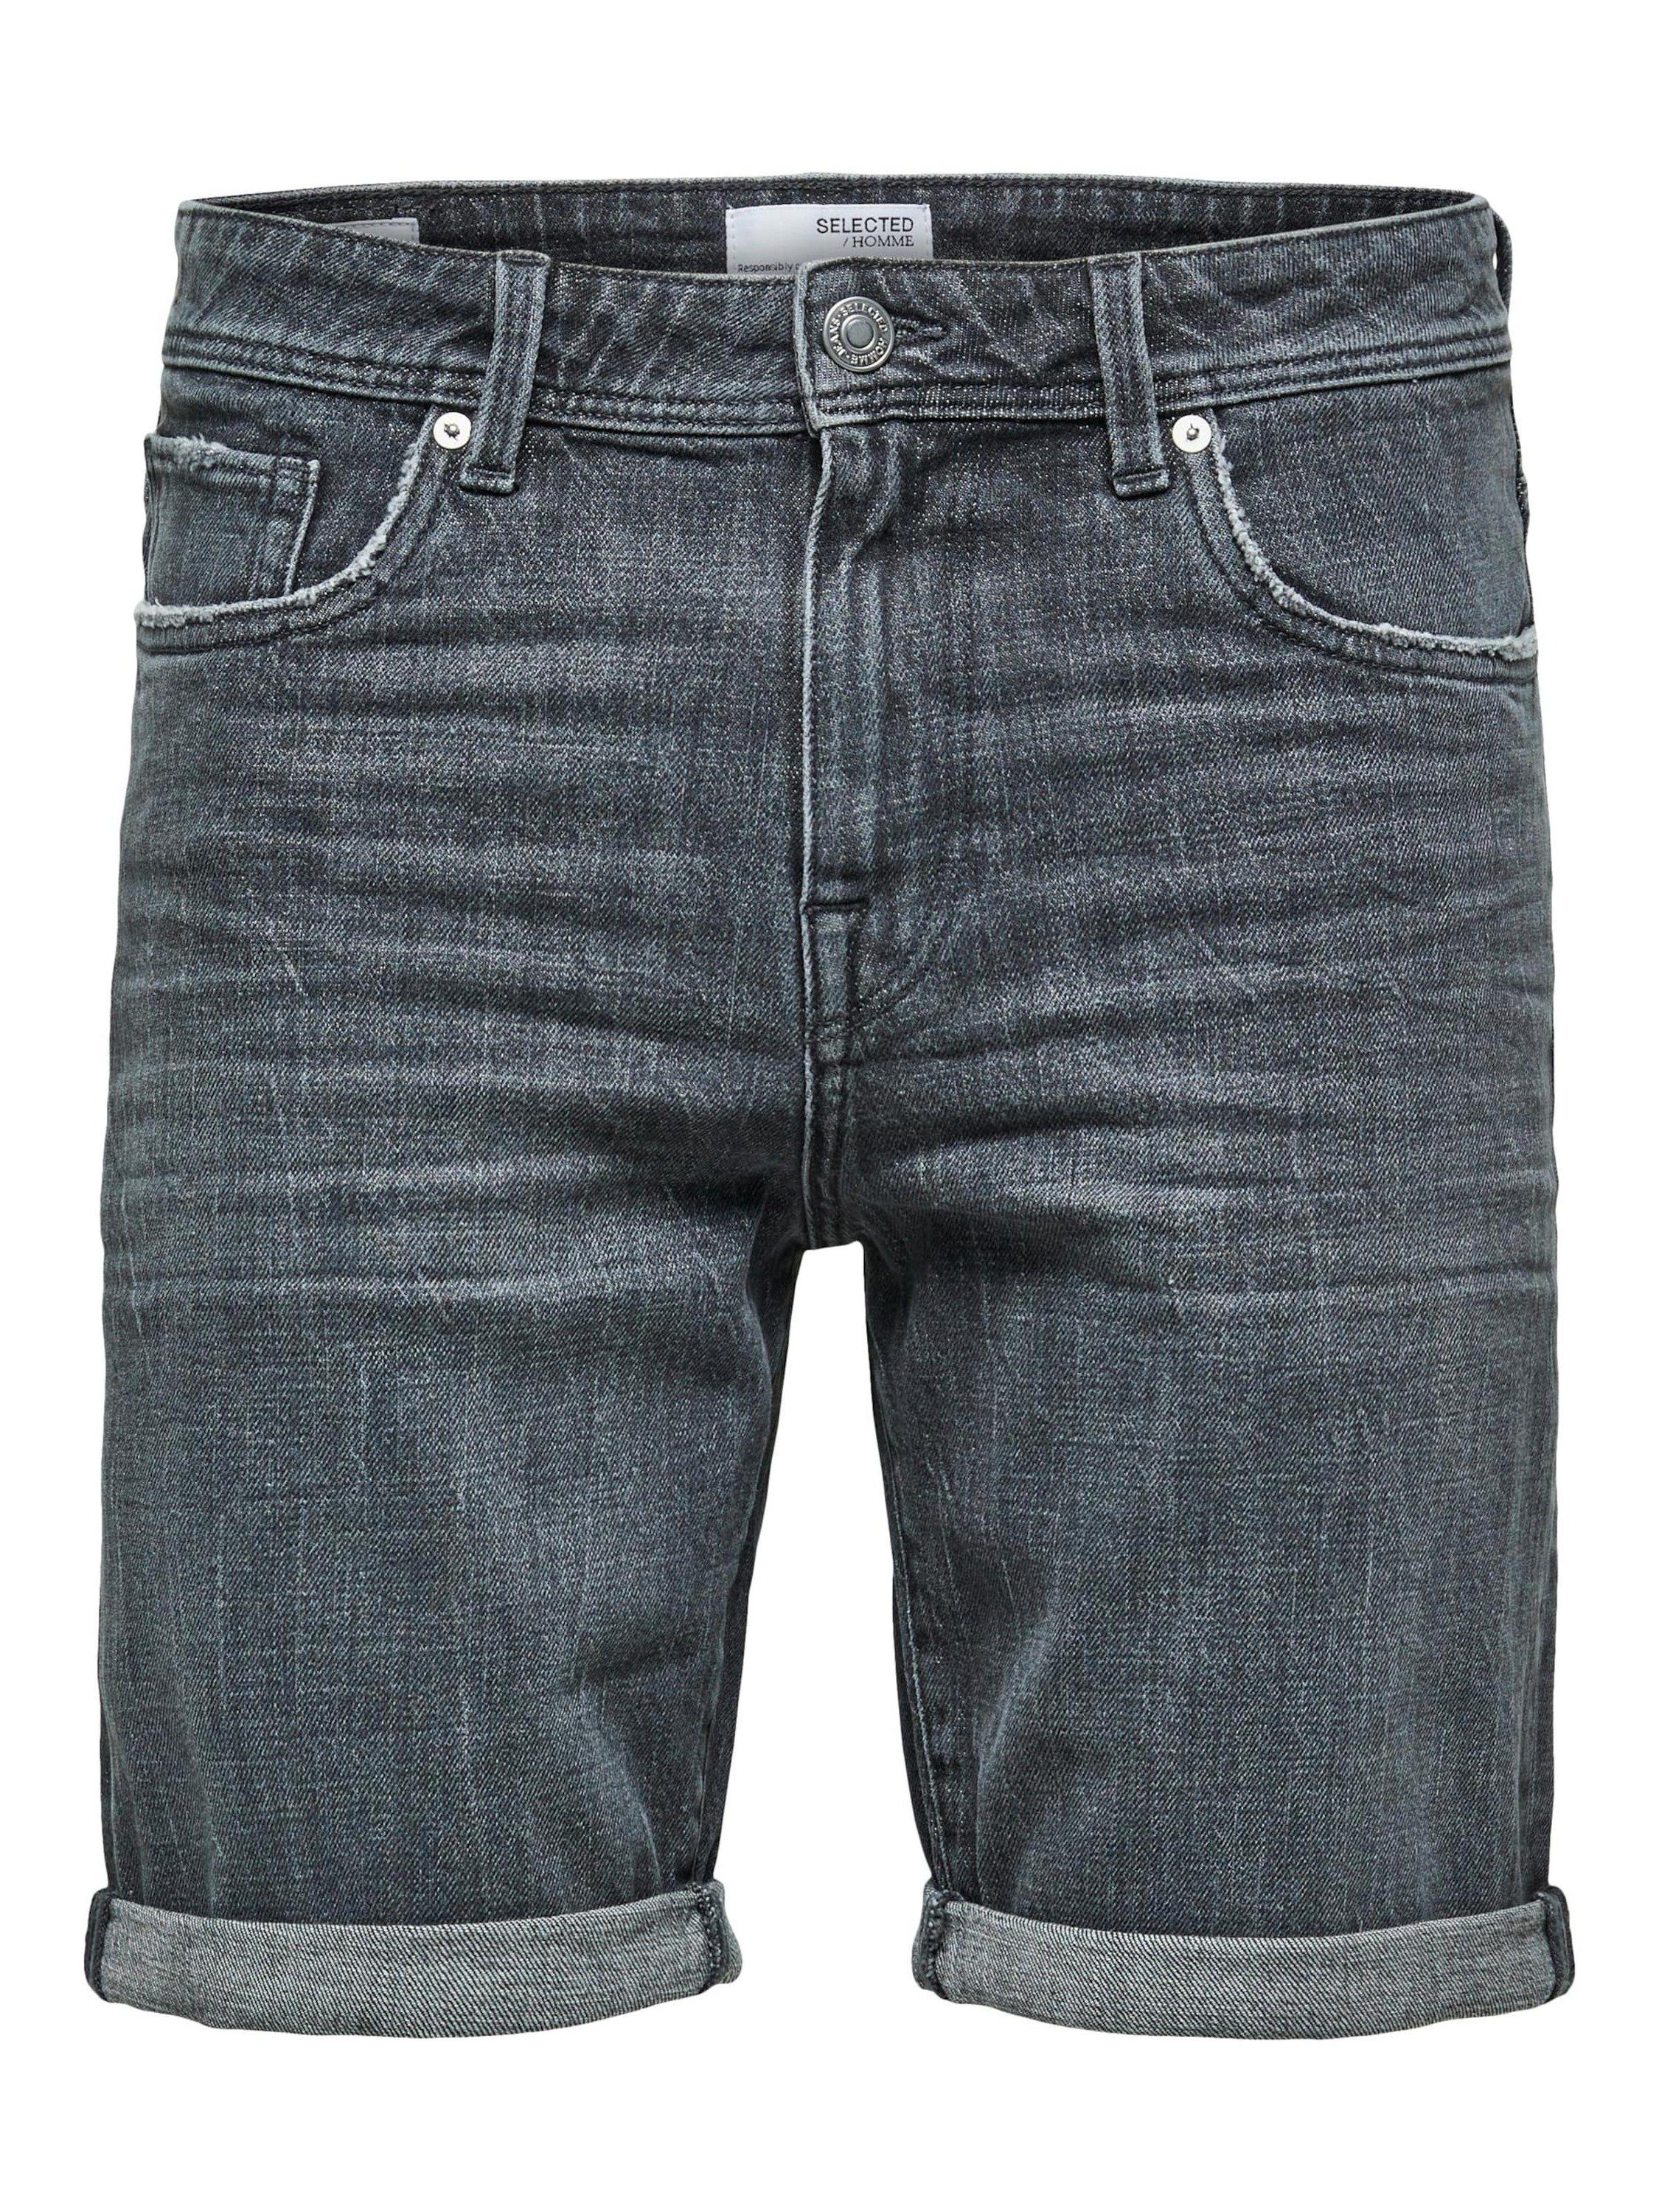 (1-tlg) HOMME SELECTED ALEX Jeansshorts